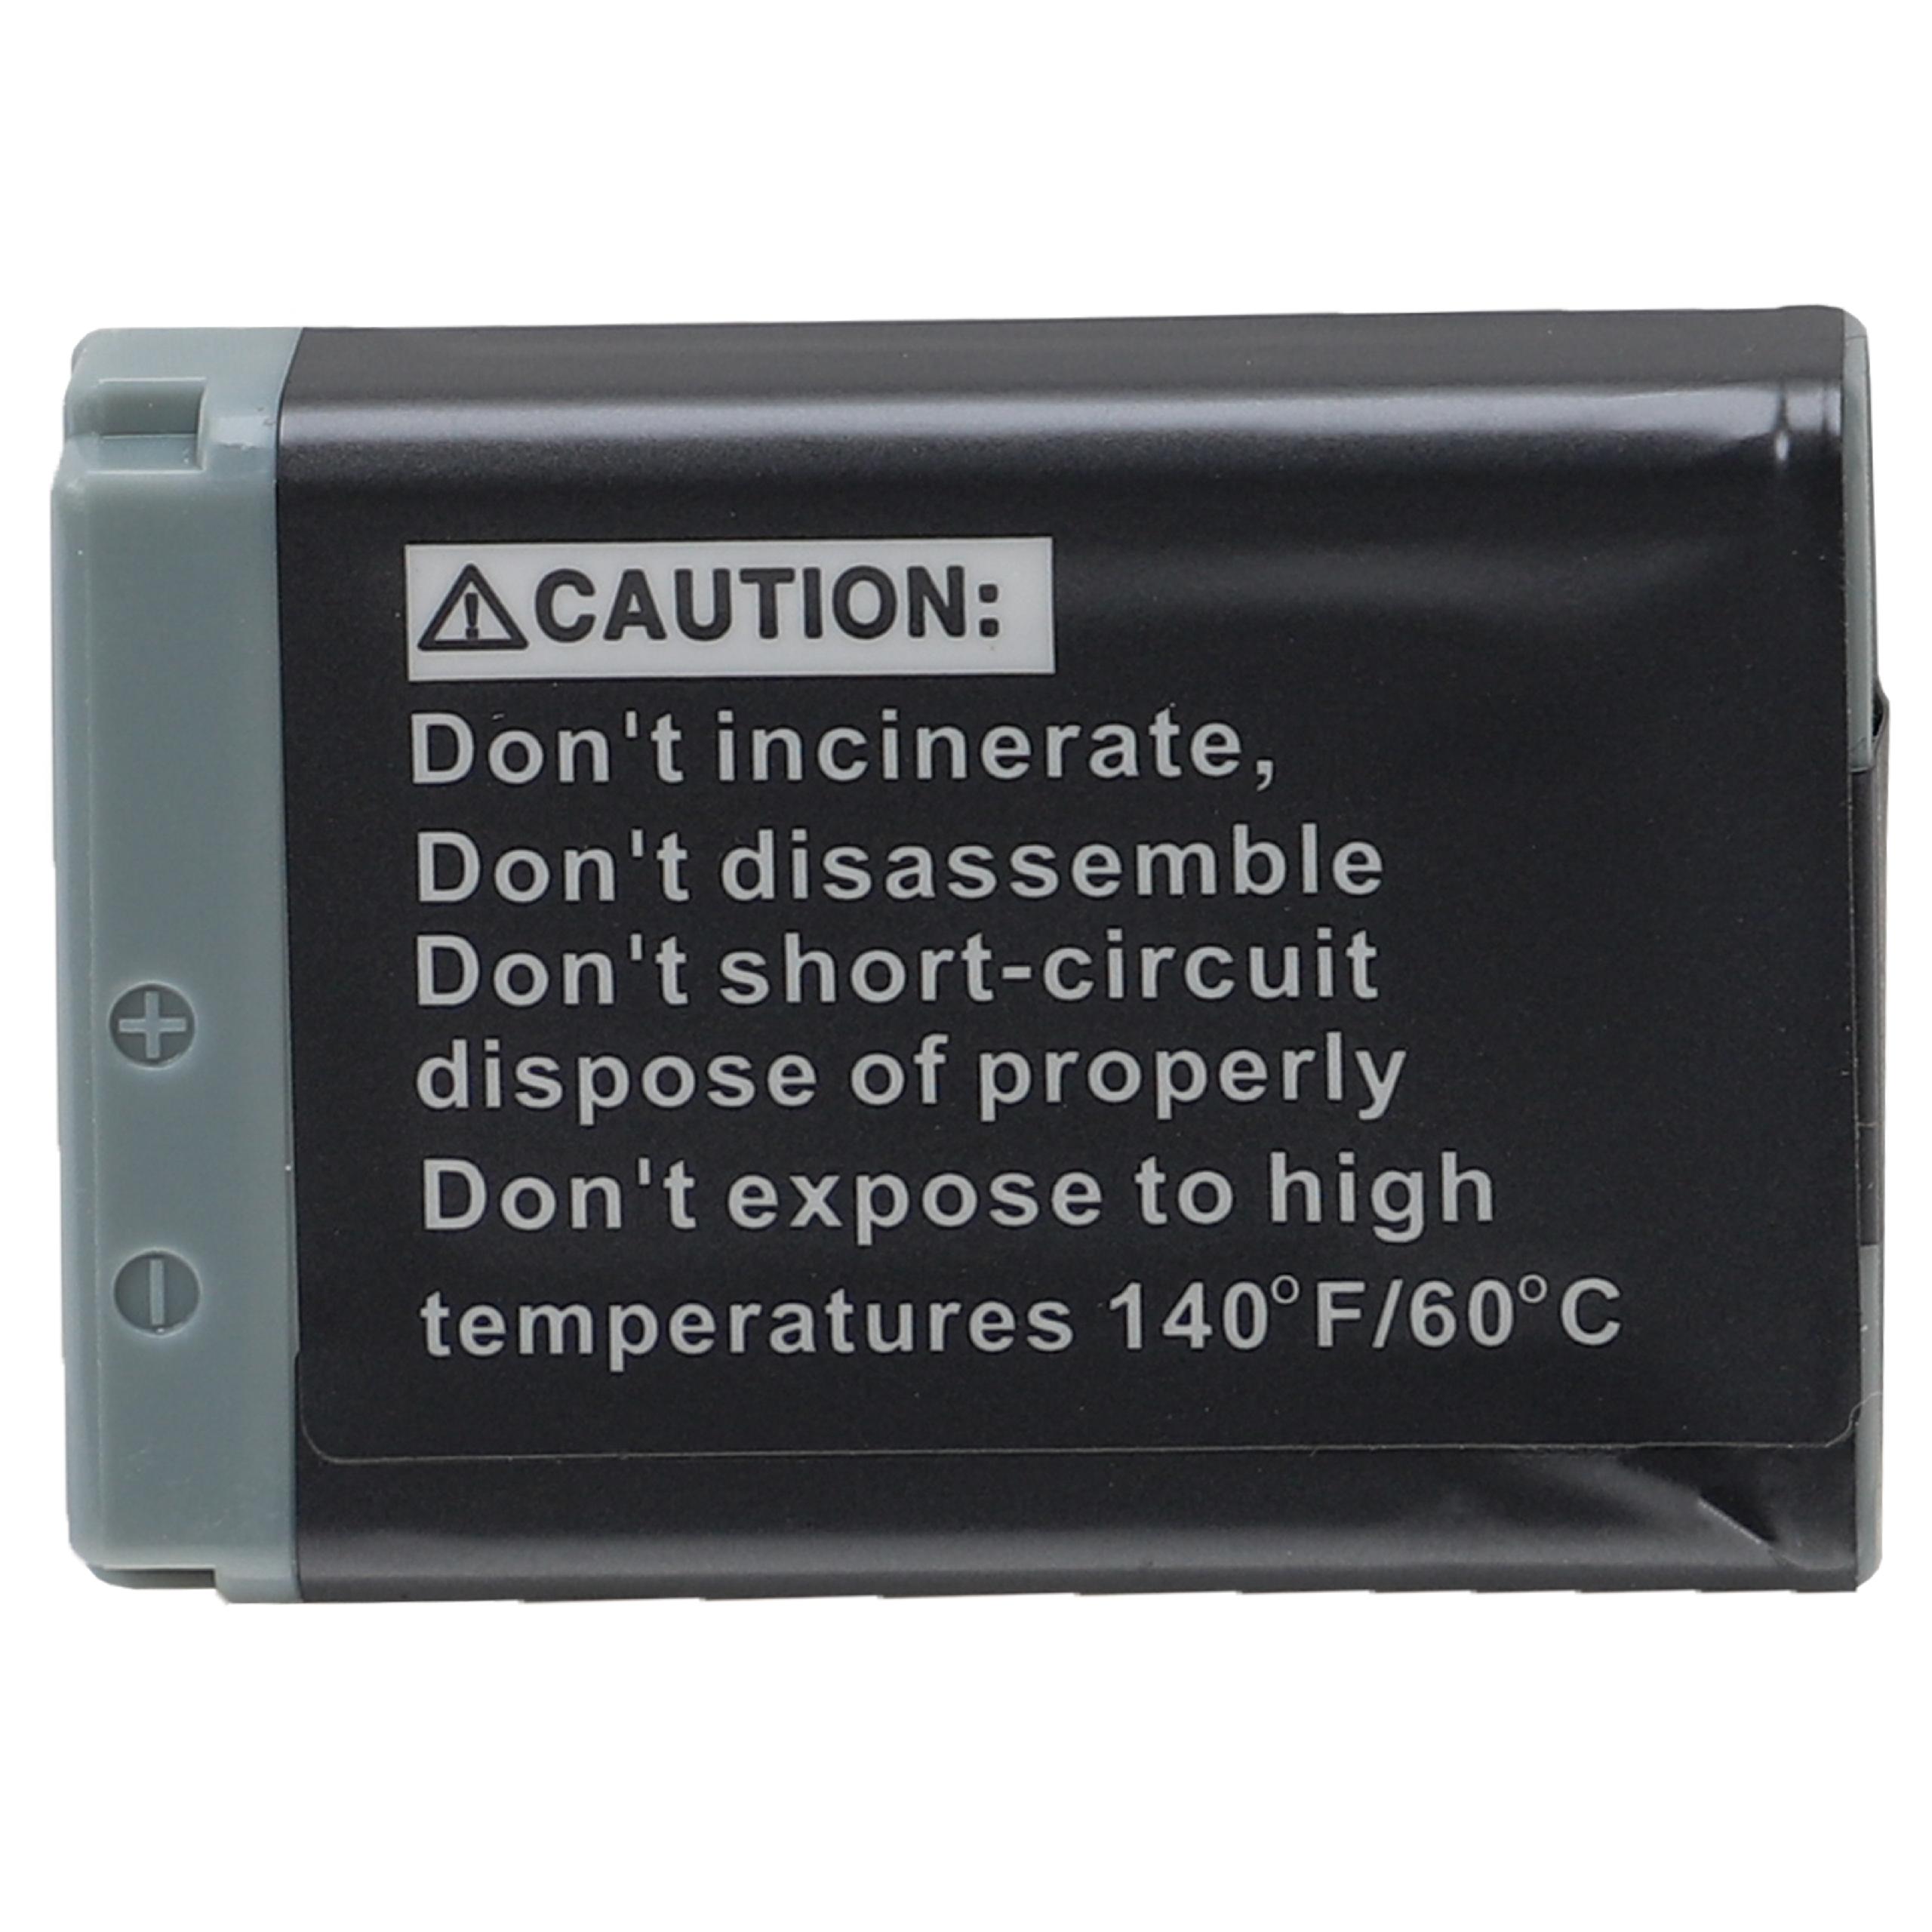 Battery Replacement for Canon NB-13L - 1250mAh, 3.6V, Li-Ion